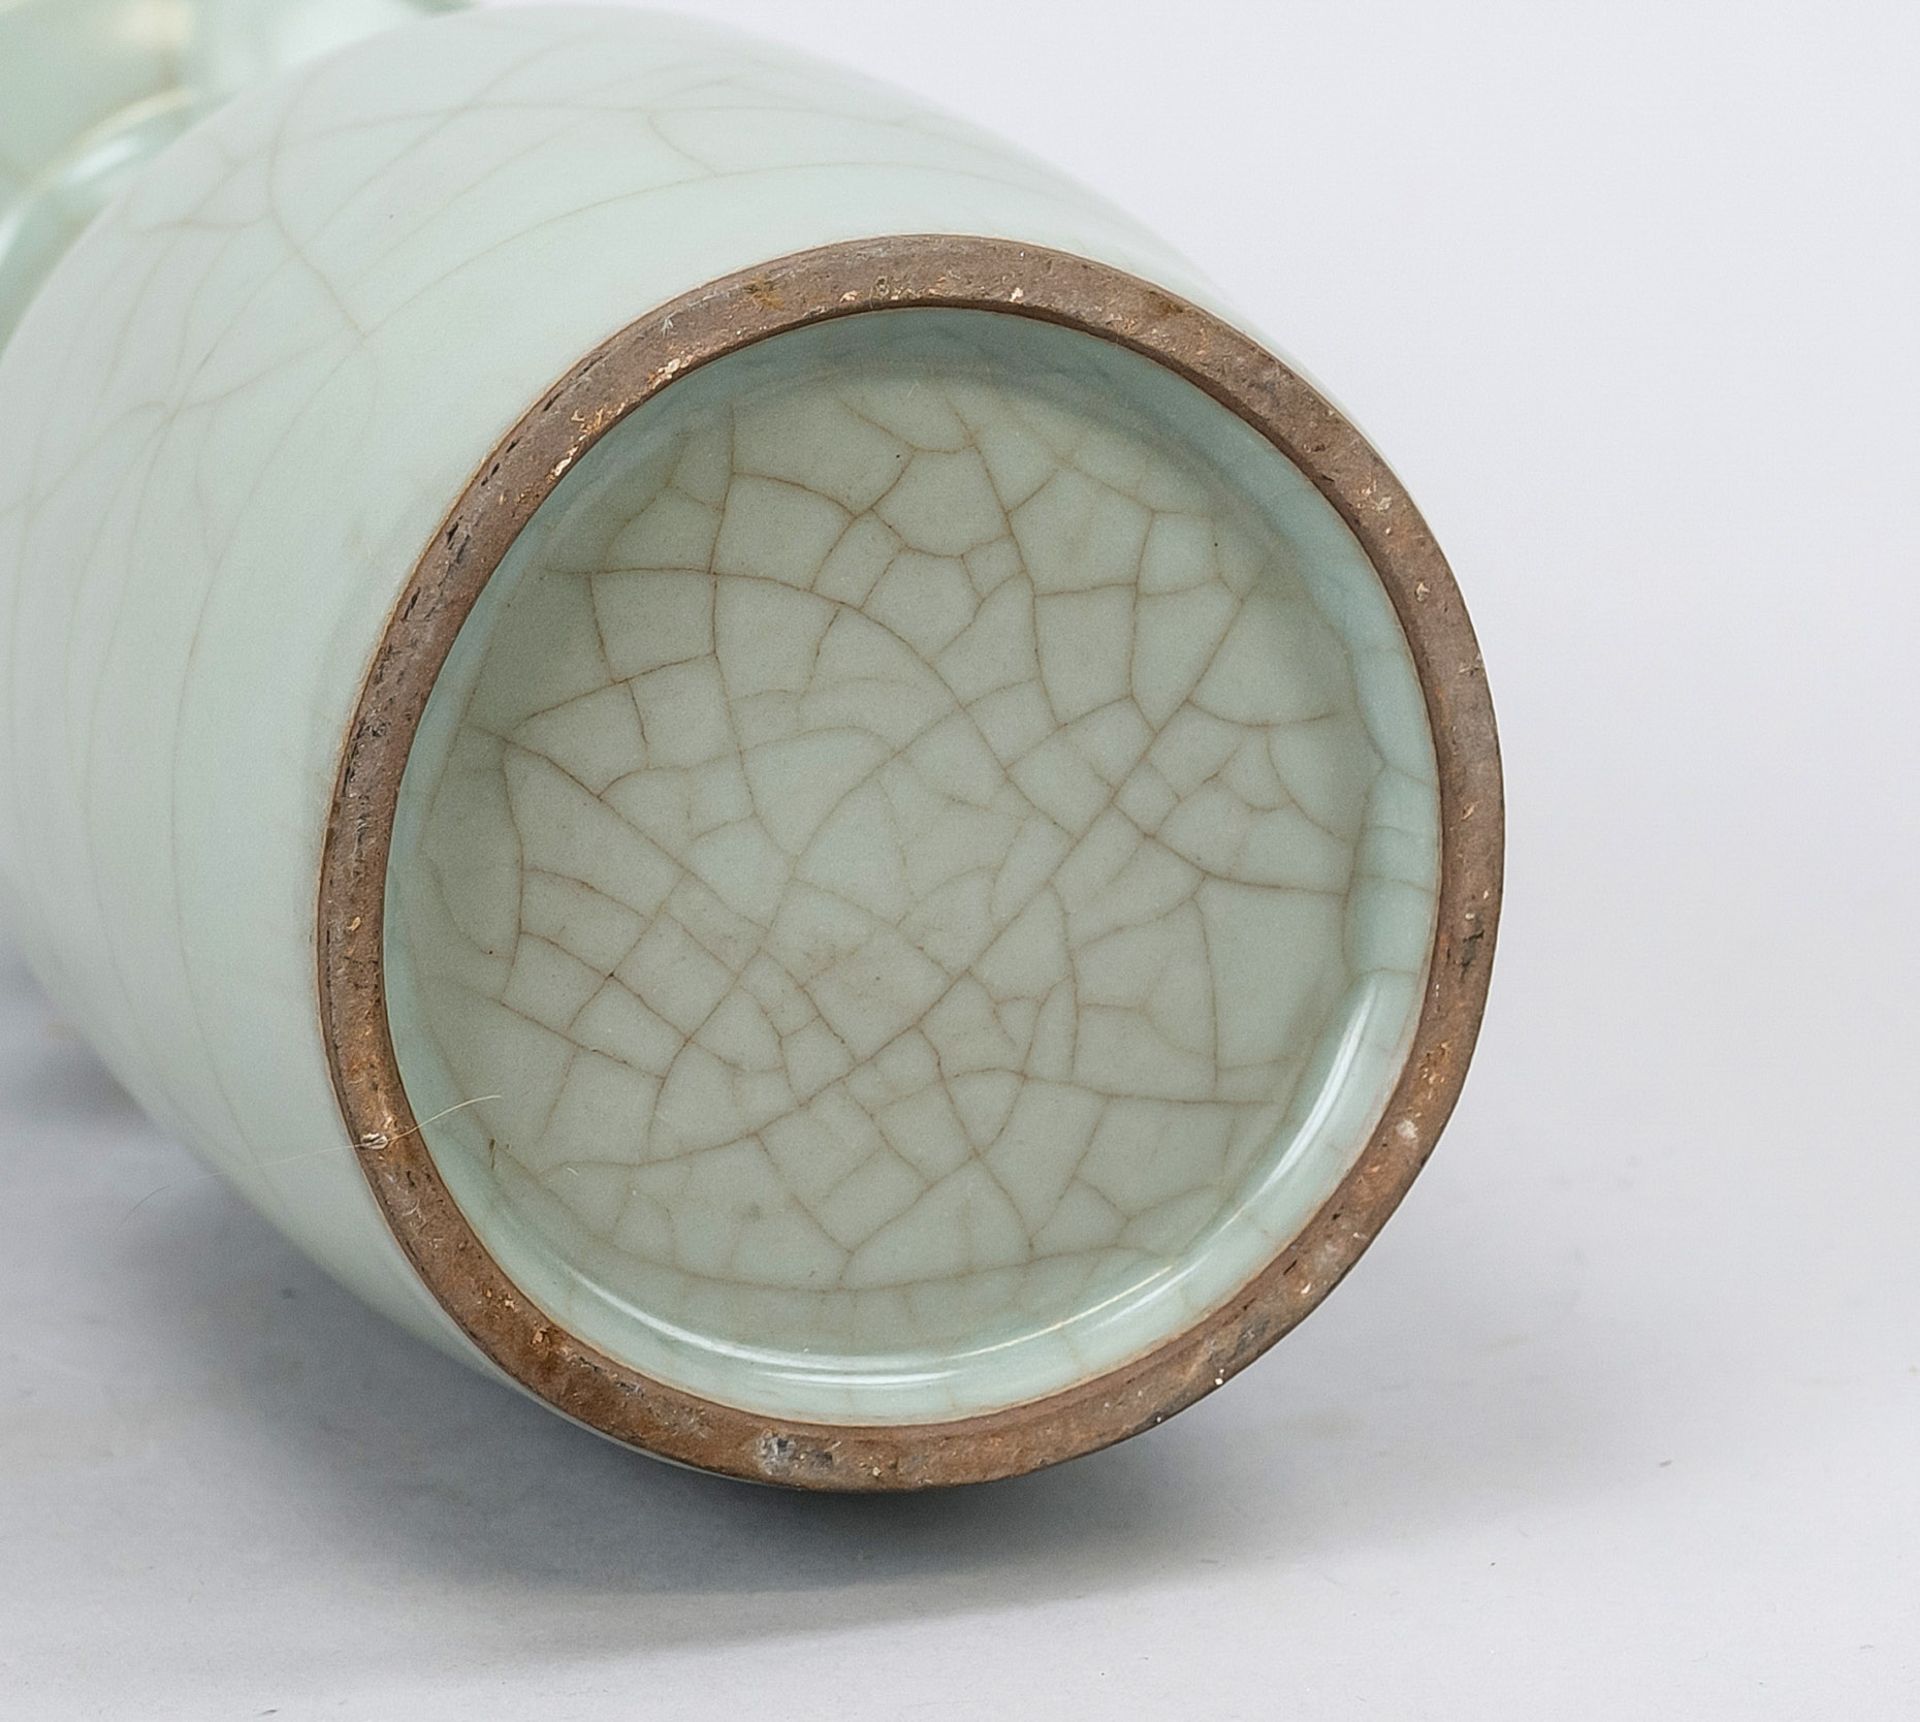 Longquan celadon mallet vase, China, 19th/20th century Monochrome, celadon-colored glaze with a - Image 2 of 2